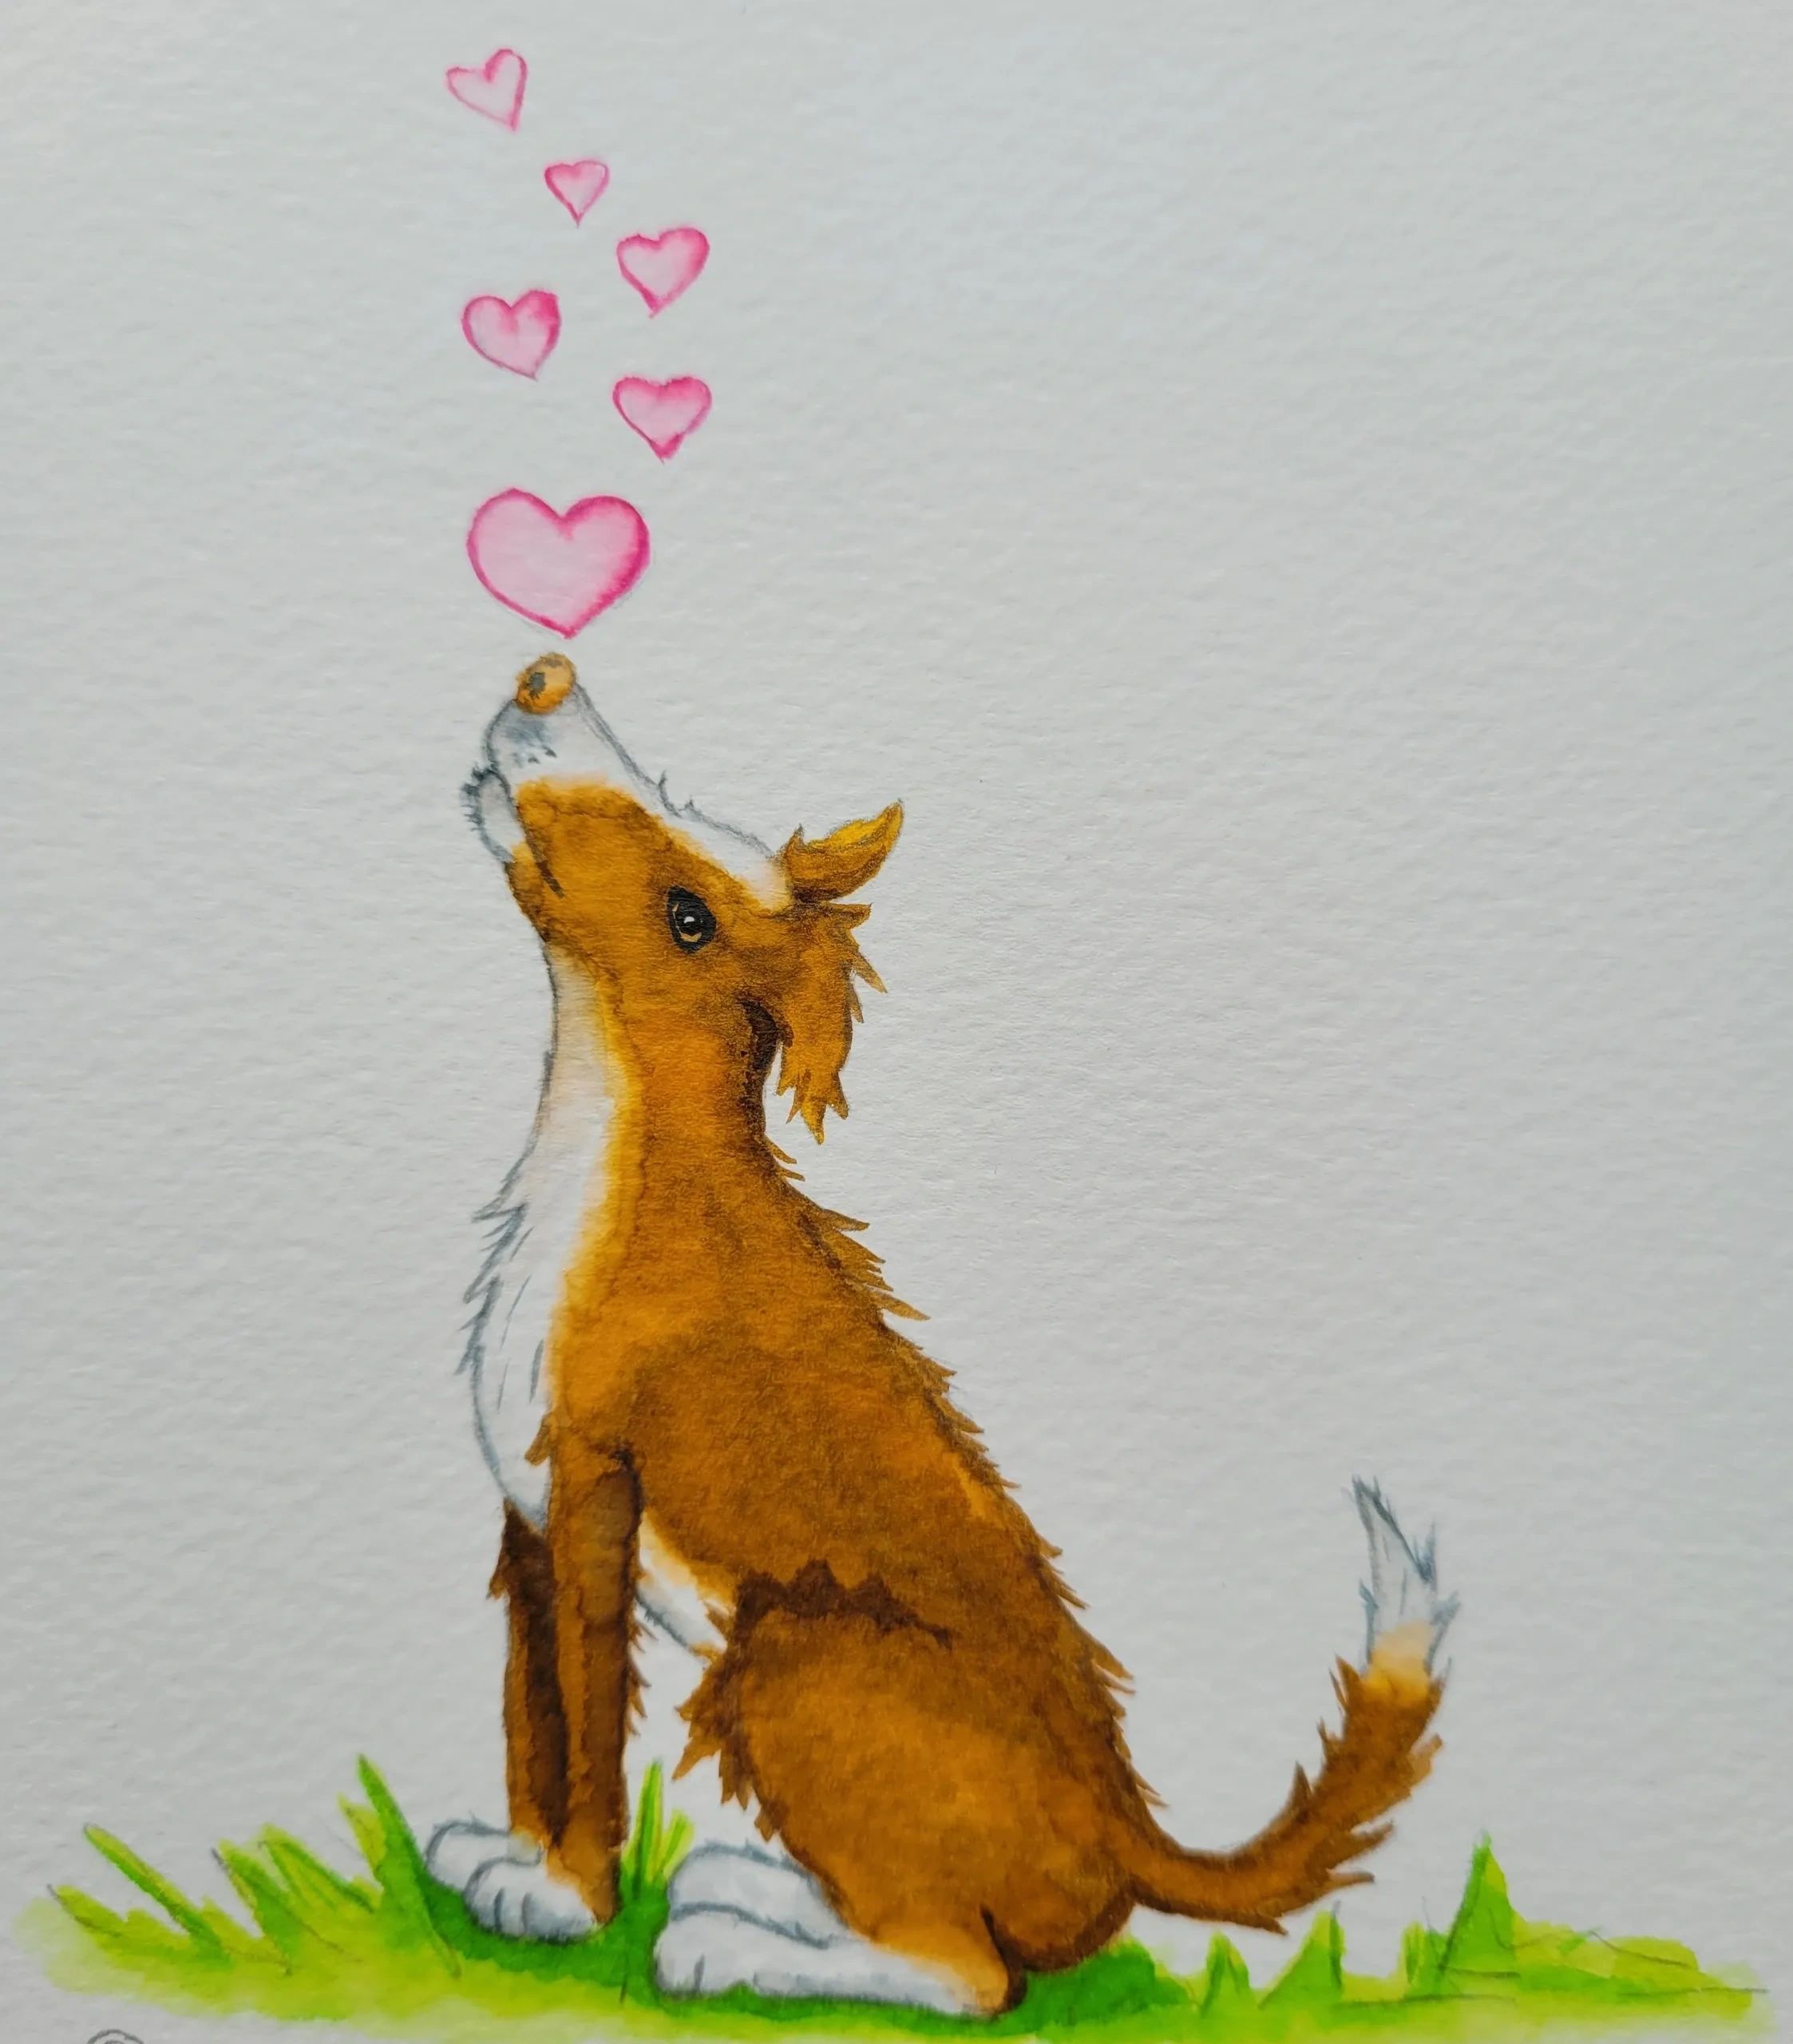 Dog and hearts watercolour